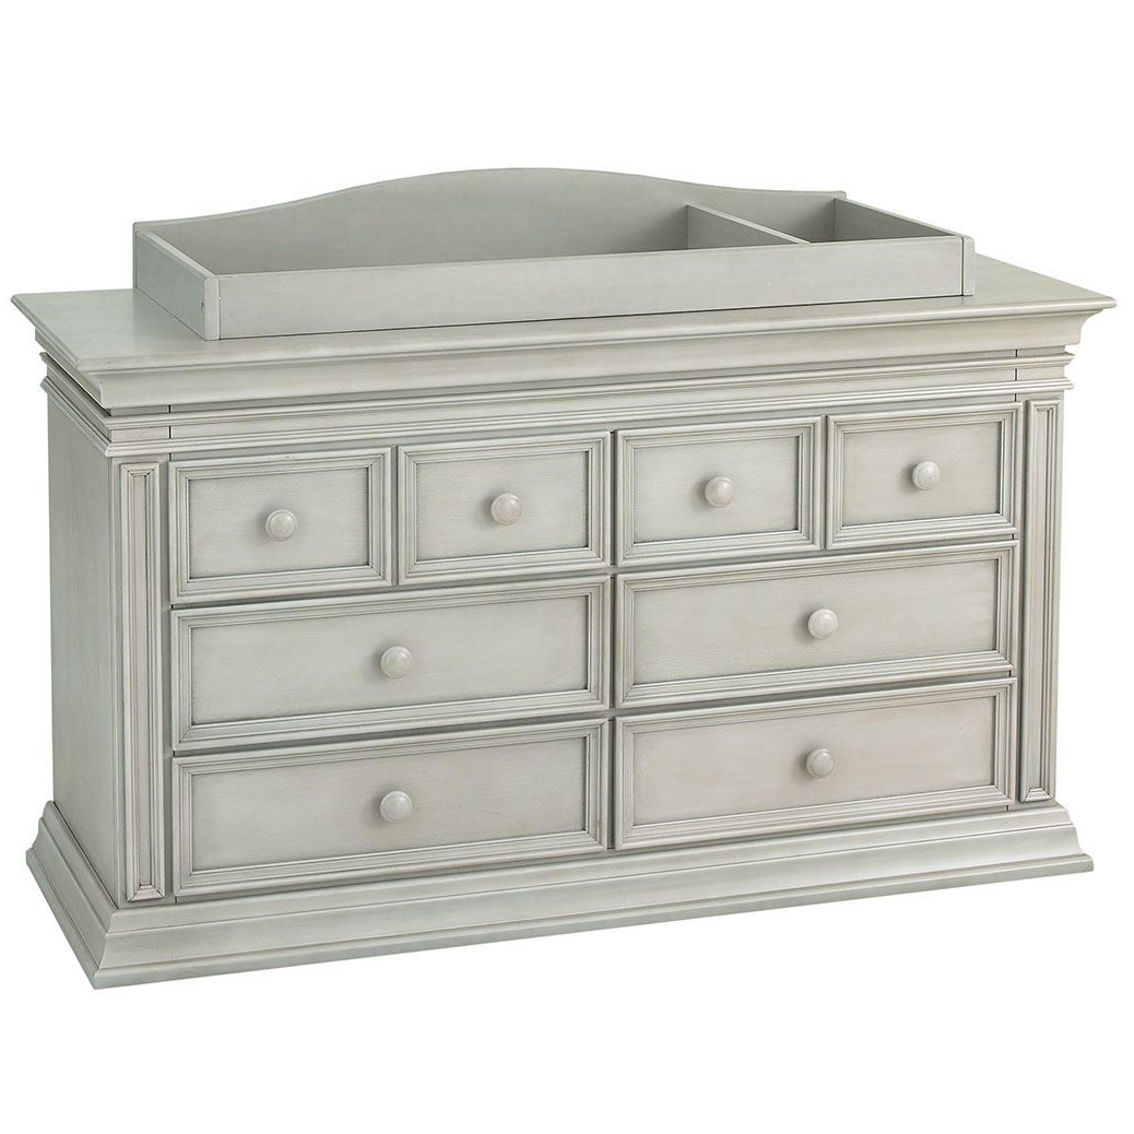 Baby Cache Vienna Changing Topper Ash Gray - Image 3 of 5